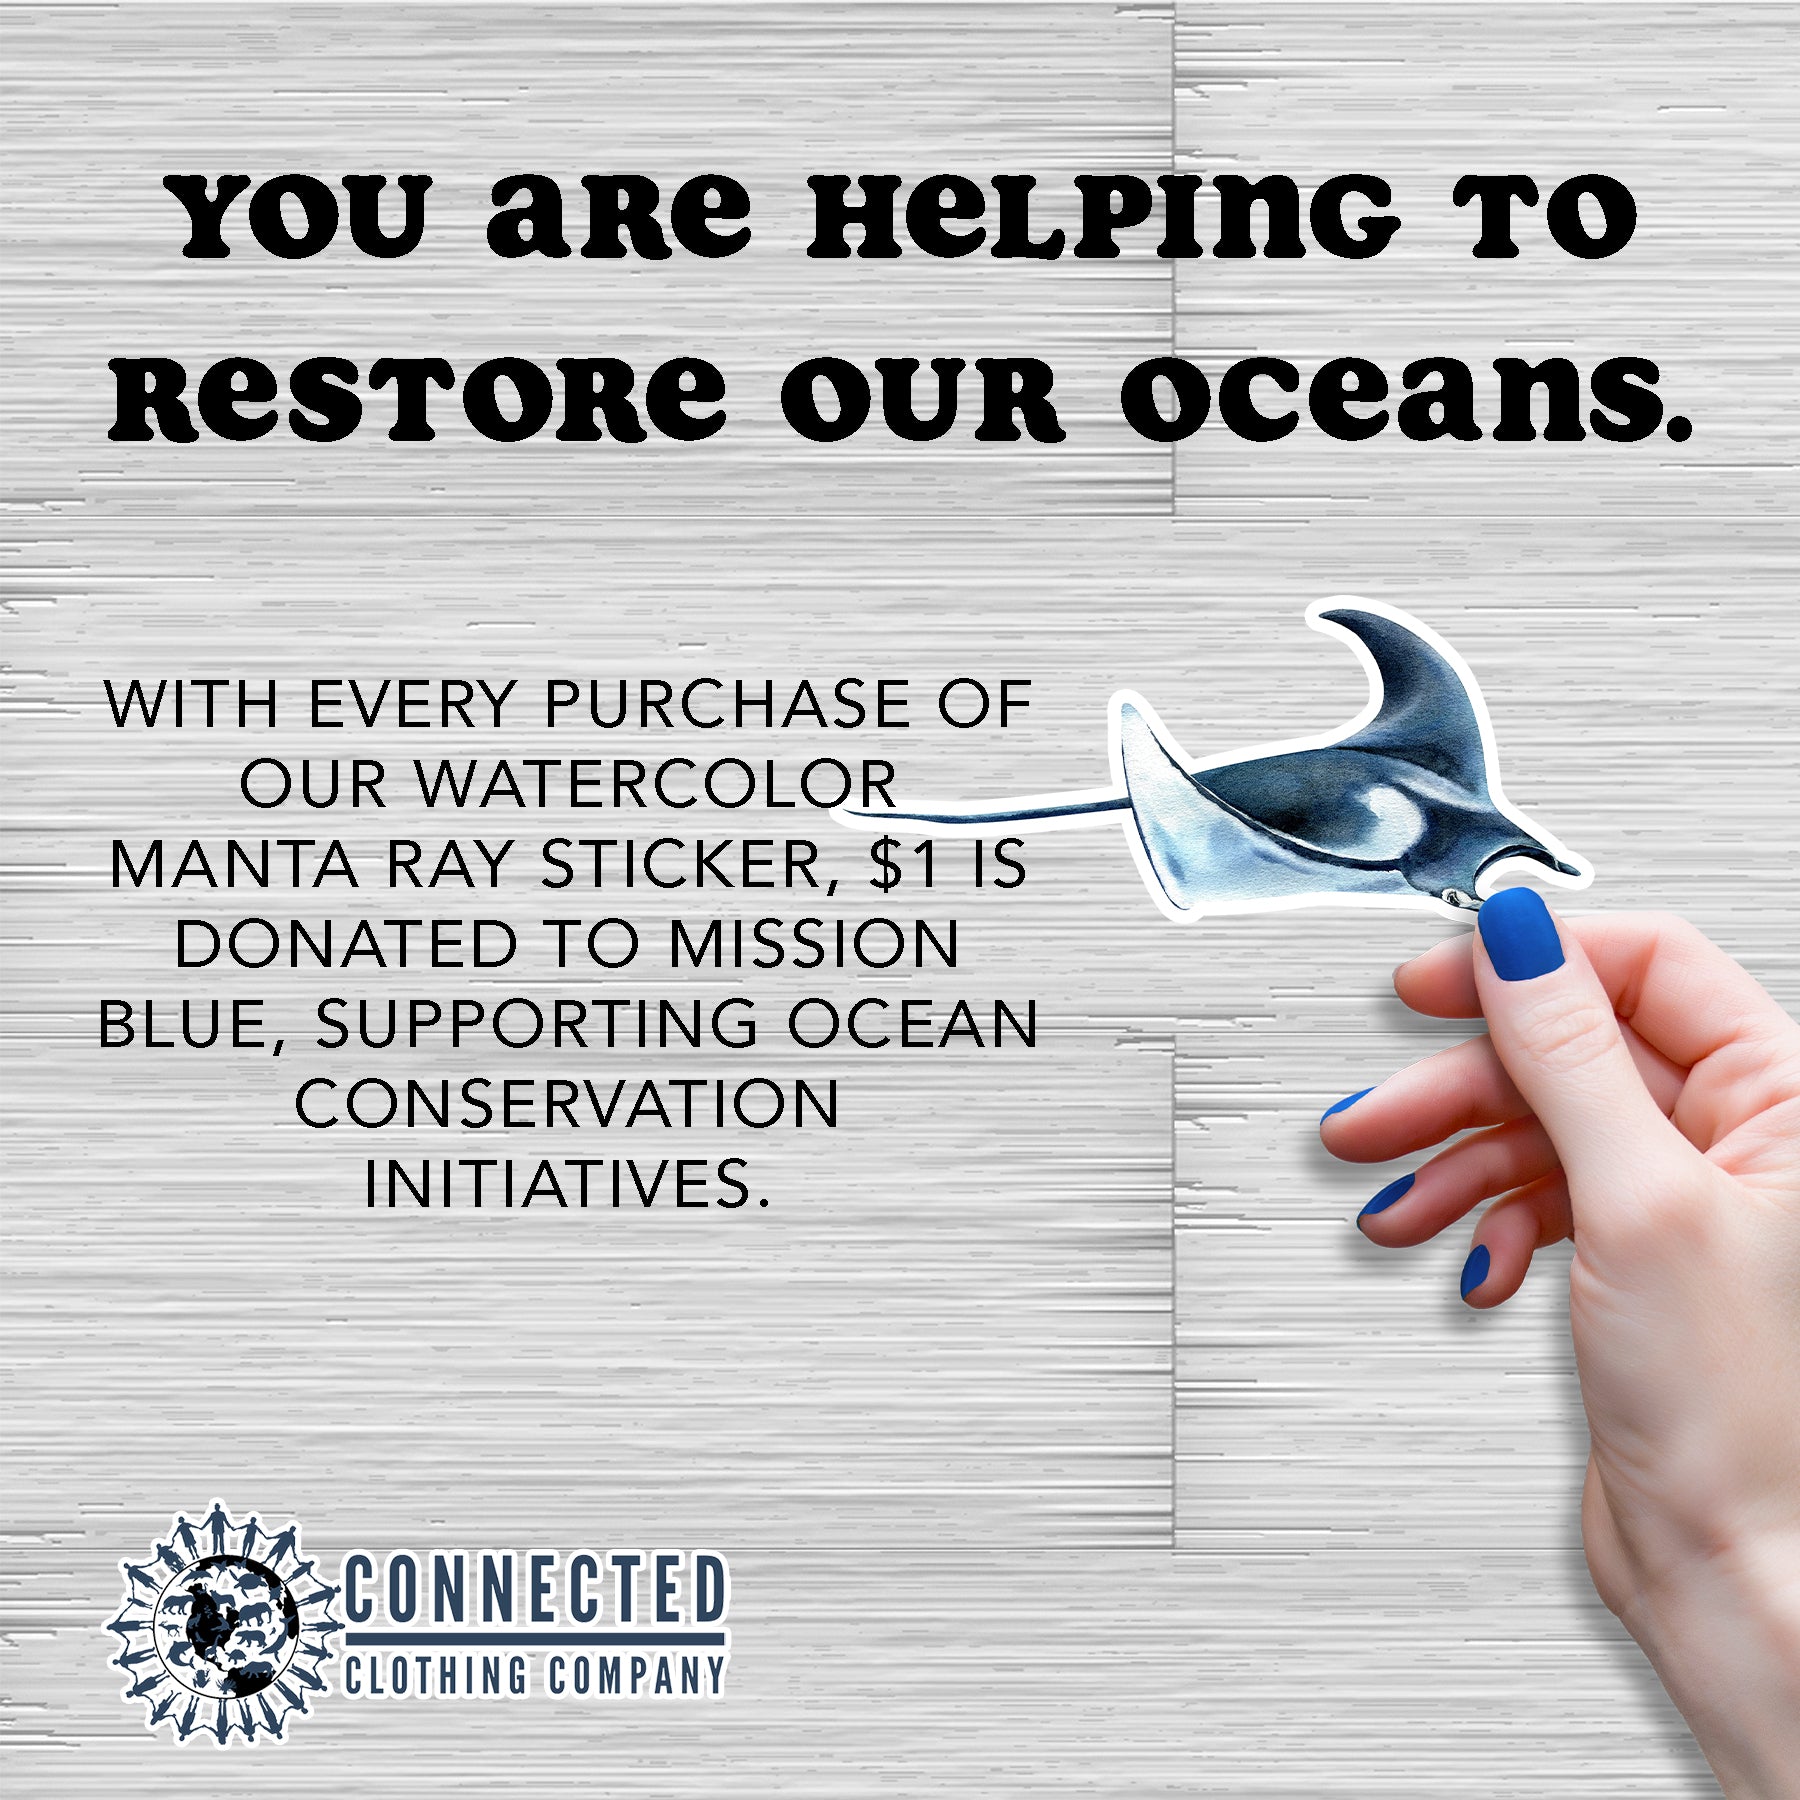 Manta Ray Sticker - Connected Clothing Company - 10% of proceeds donated to ocean conservation